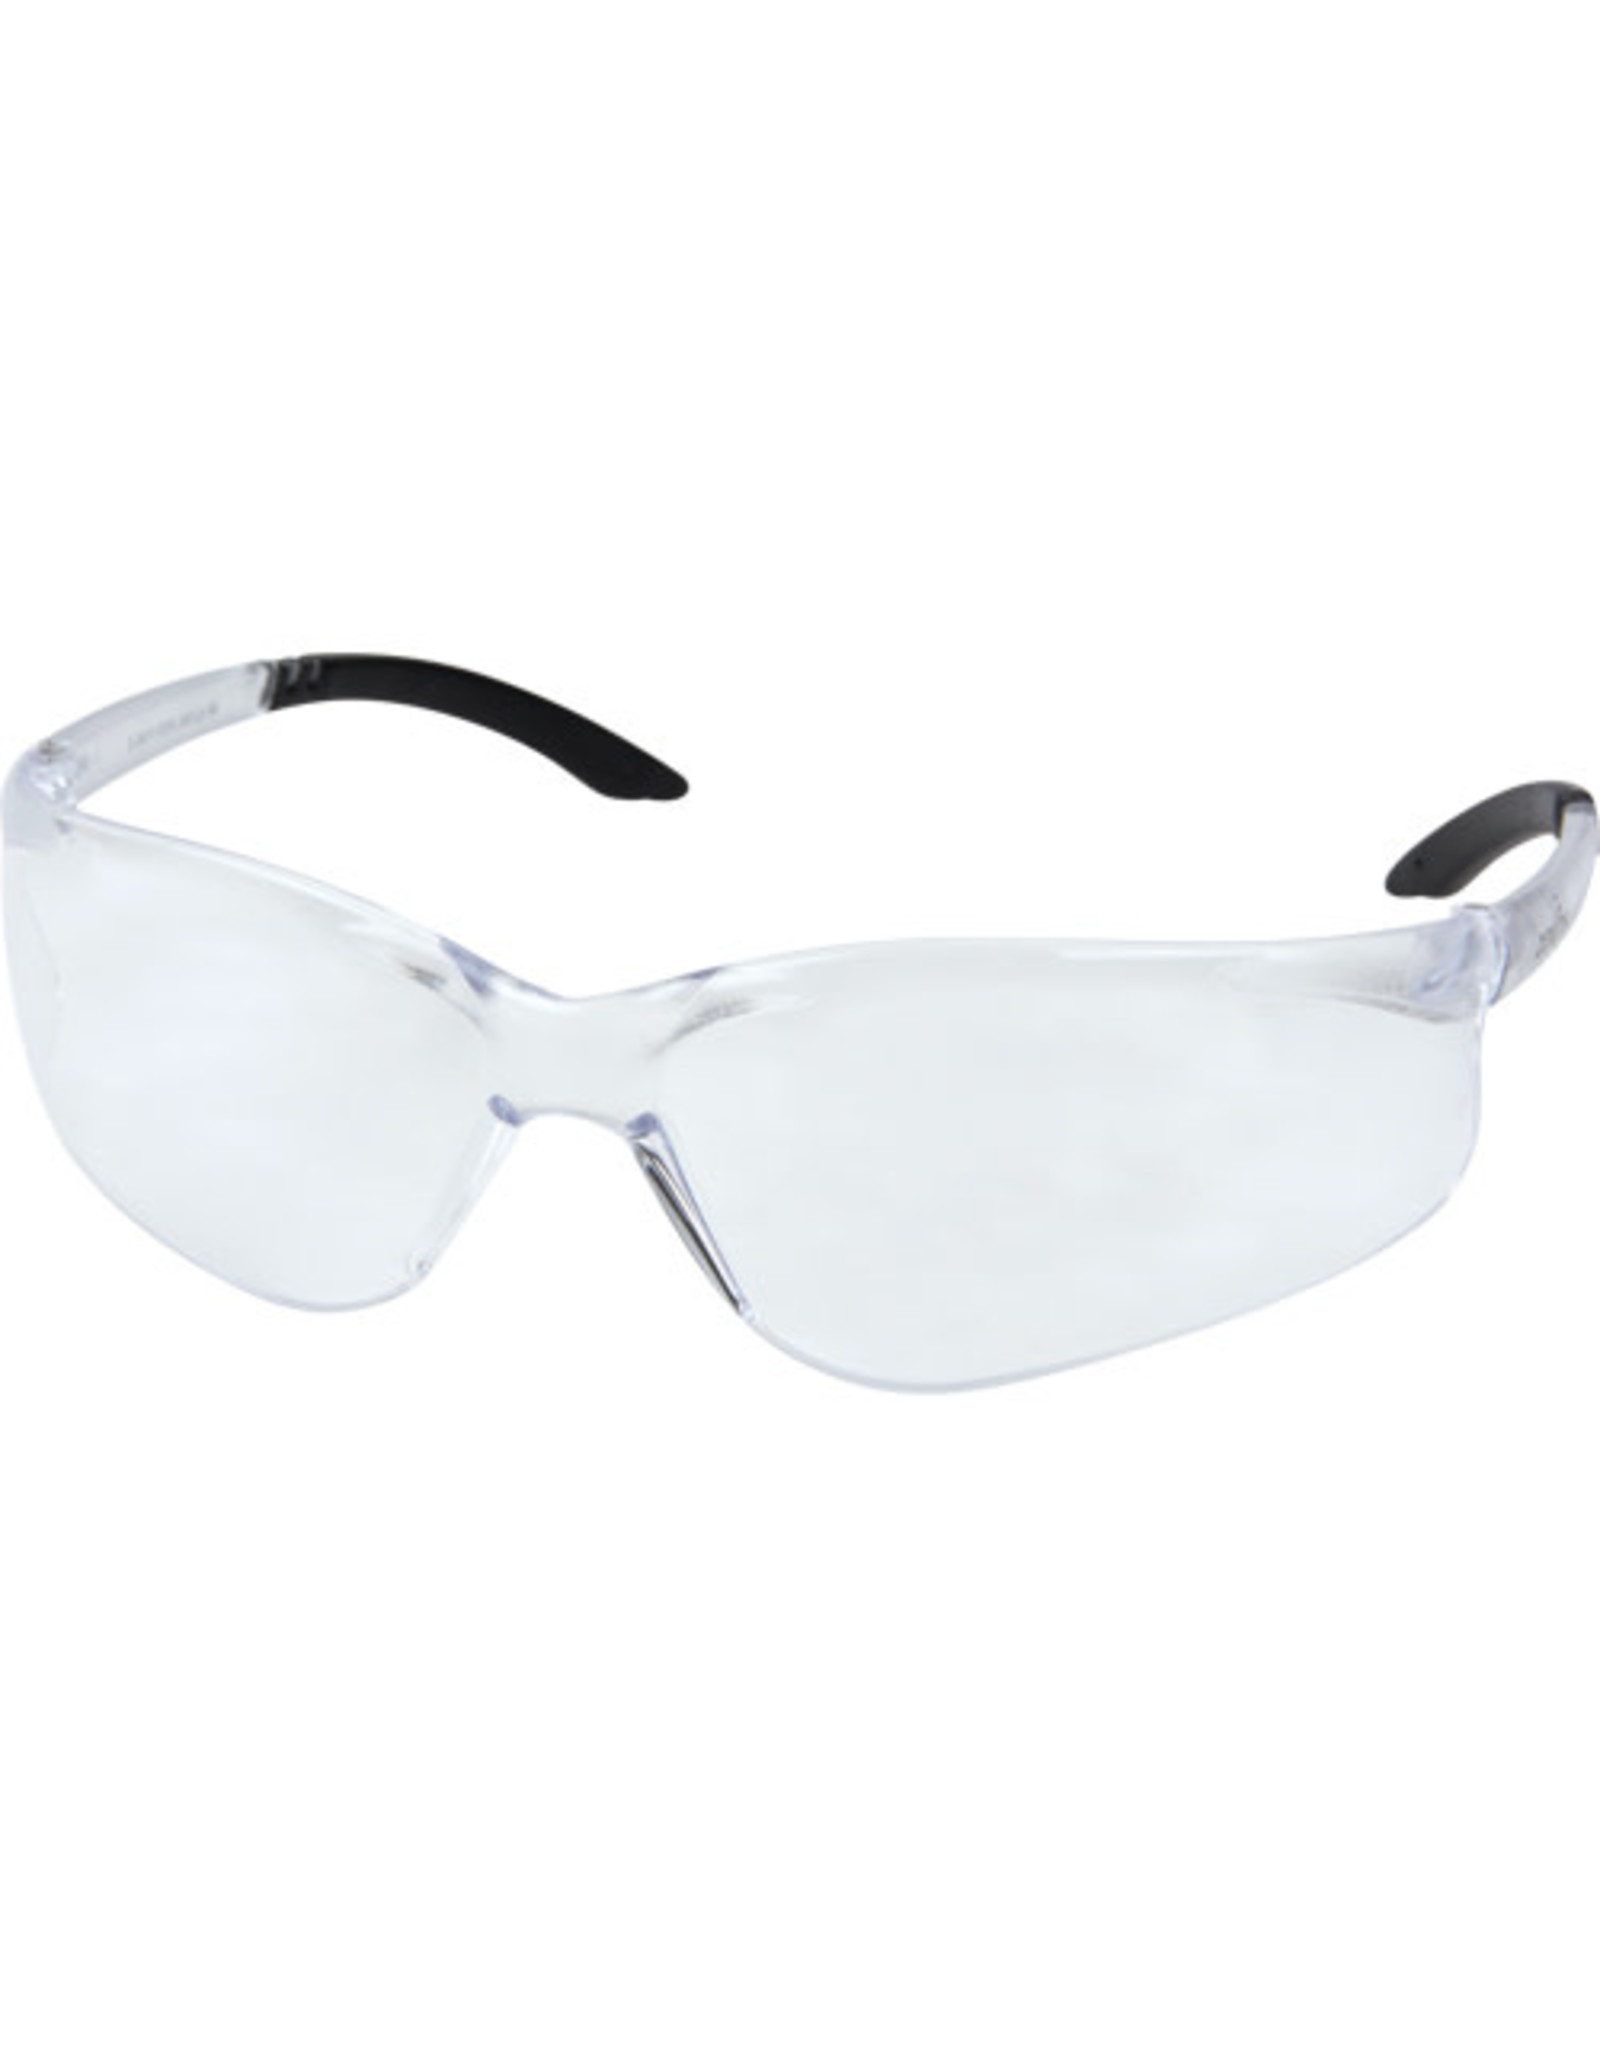 Zenith Safety Glasses - Clear/Anti-Scratch